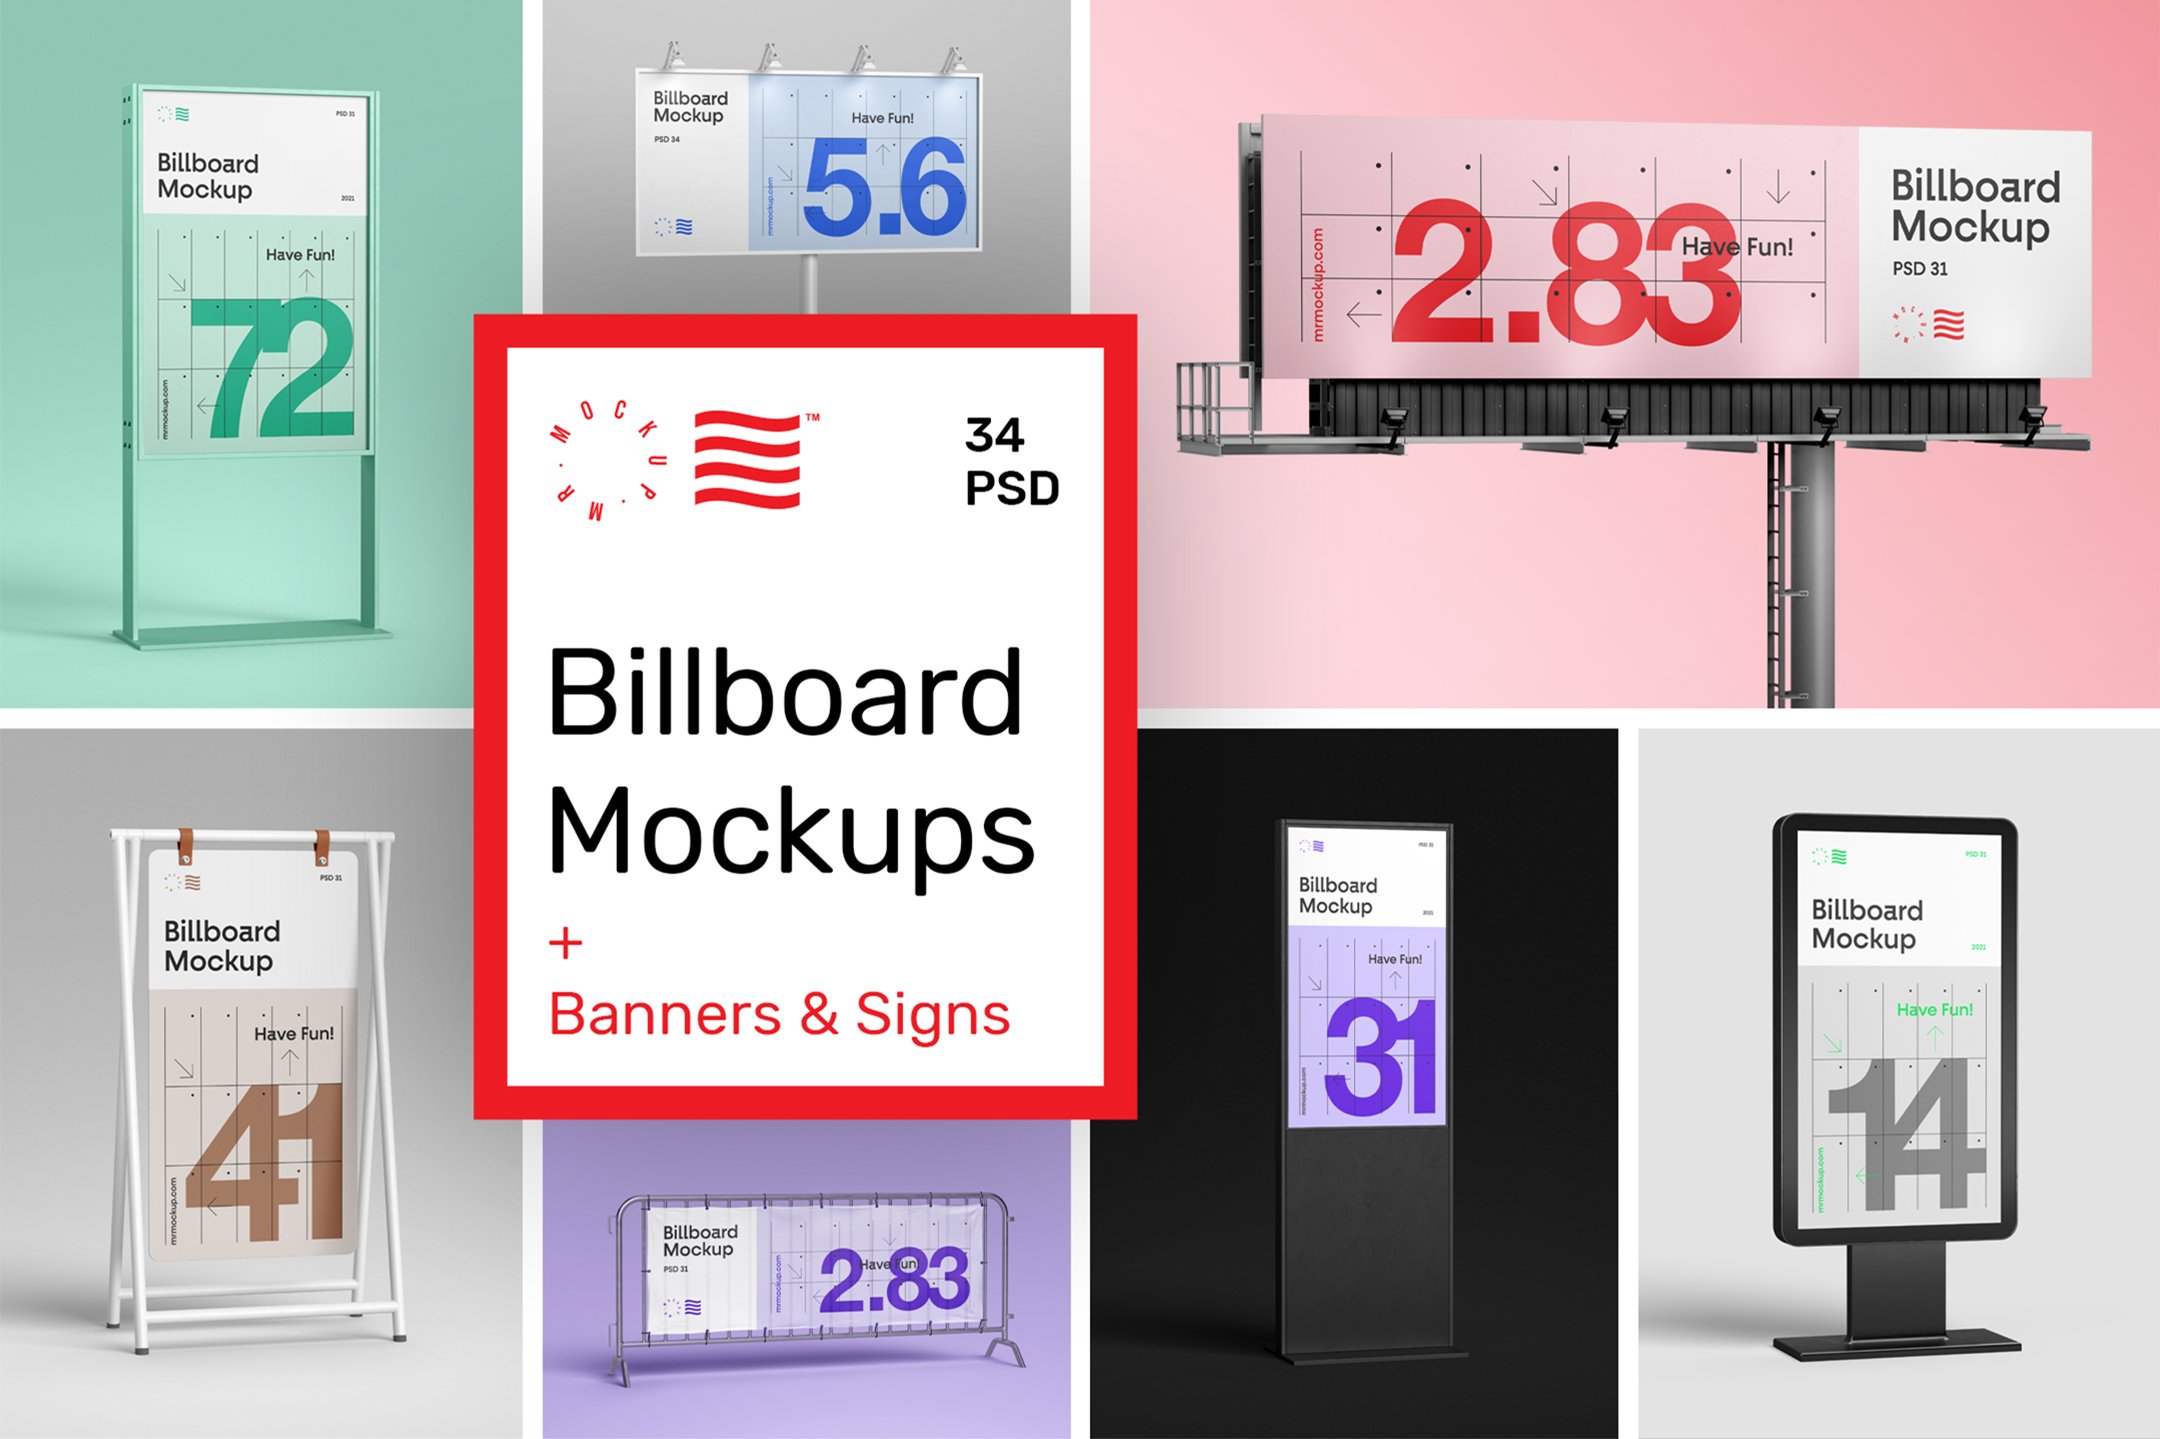 Billboard Mockups + Banners & Signs cover image.